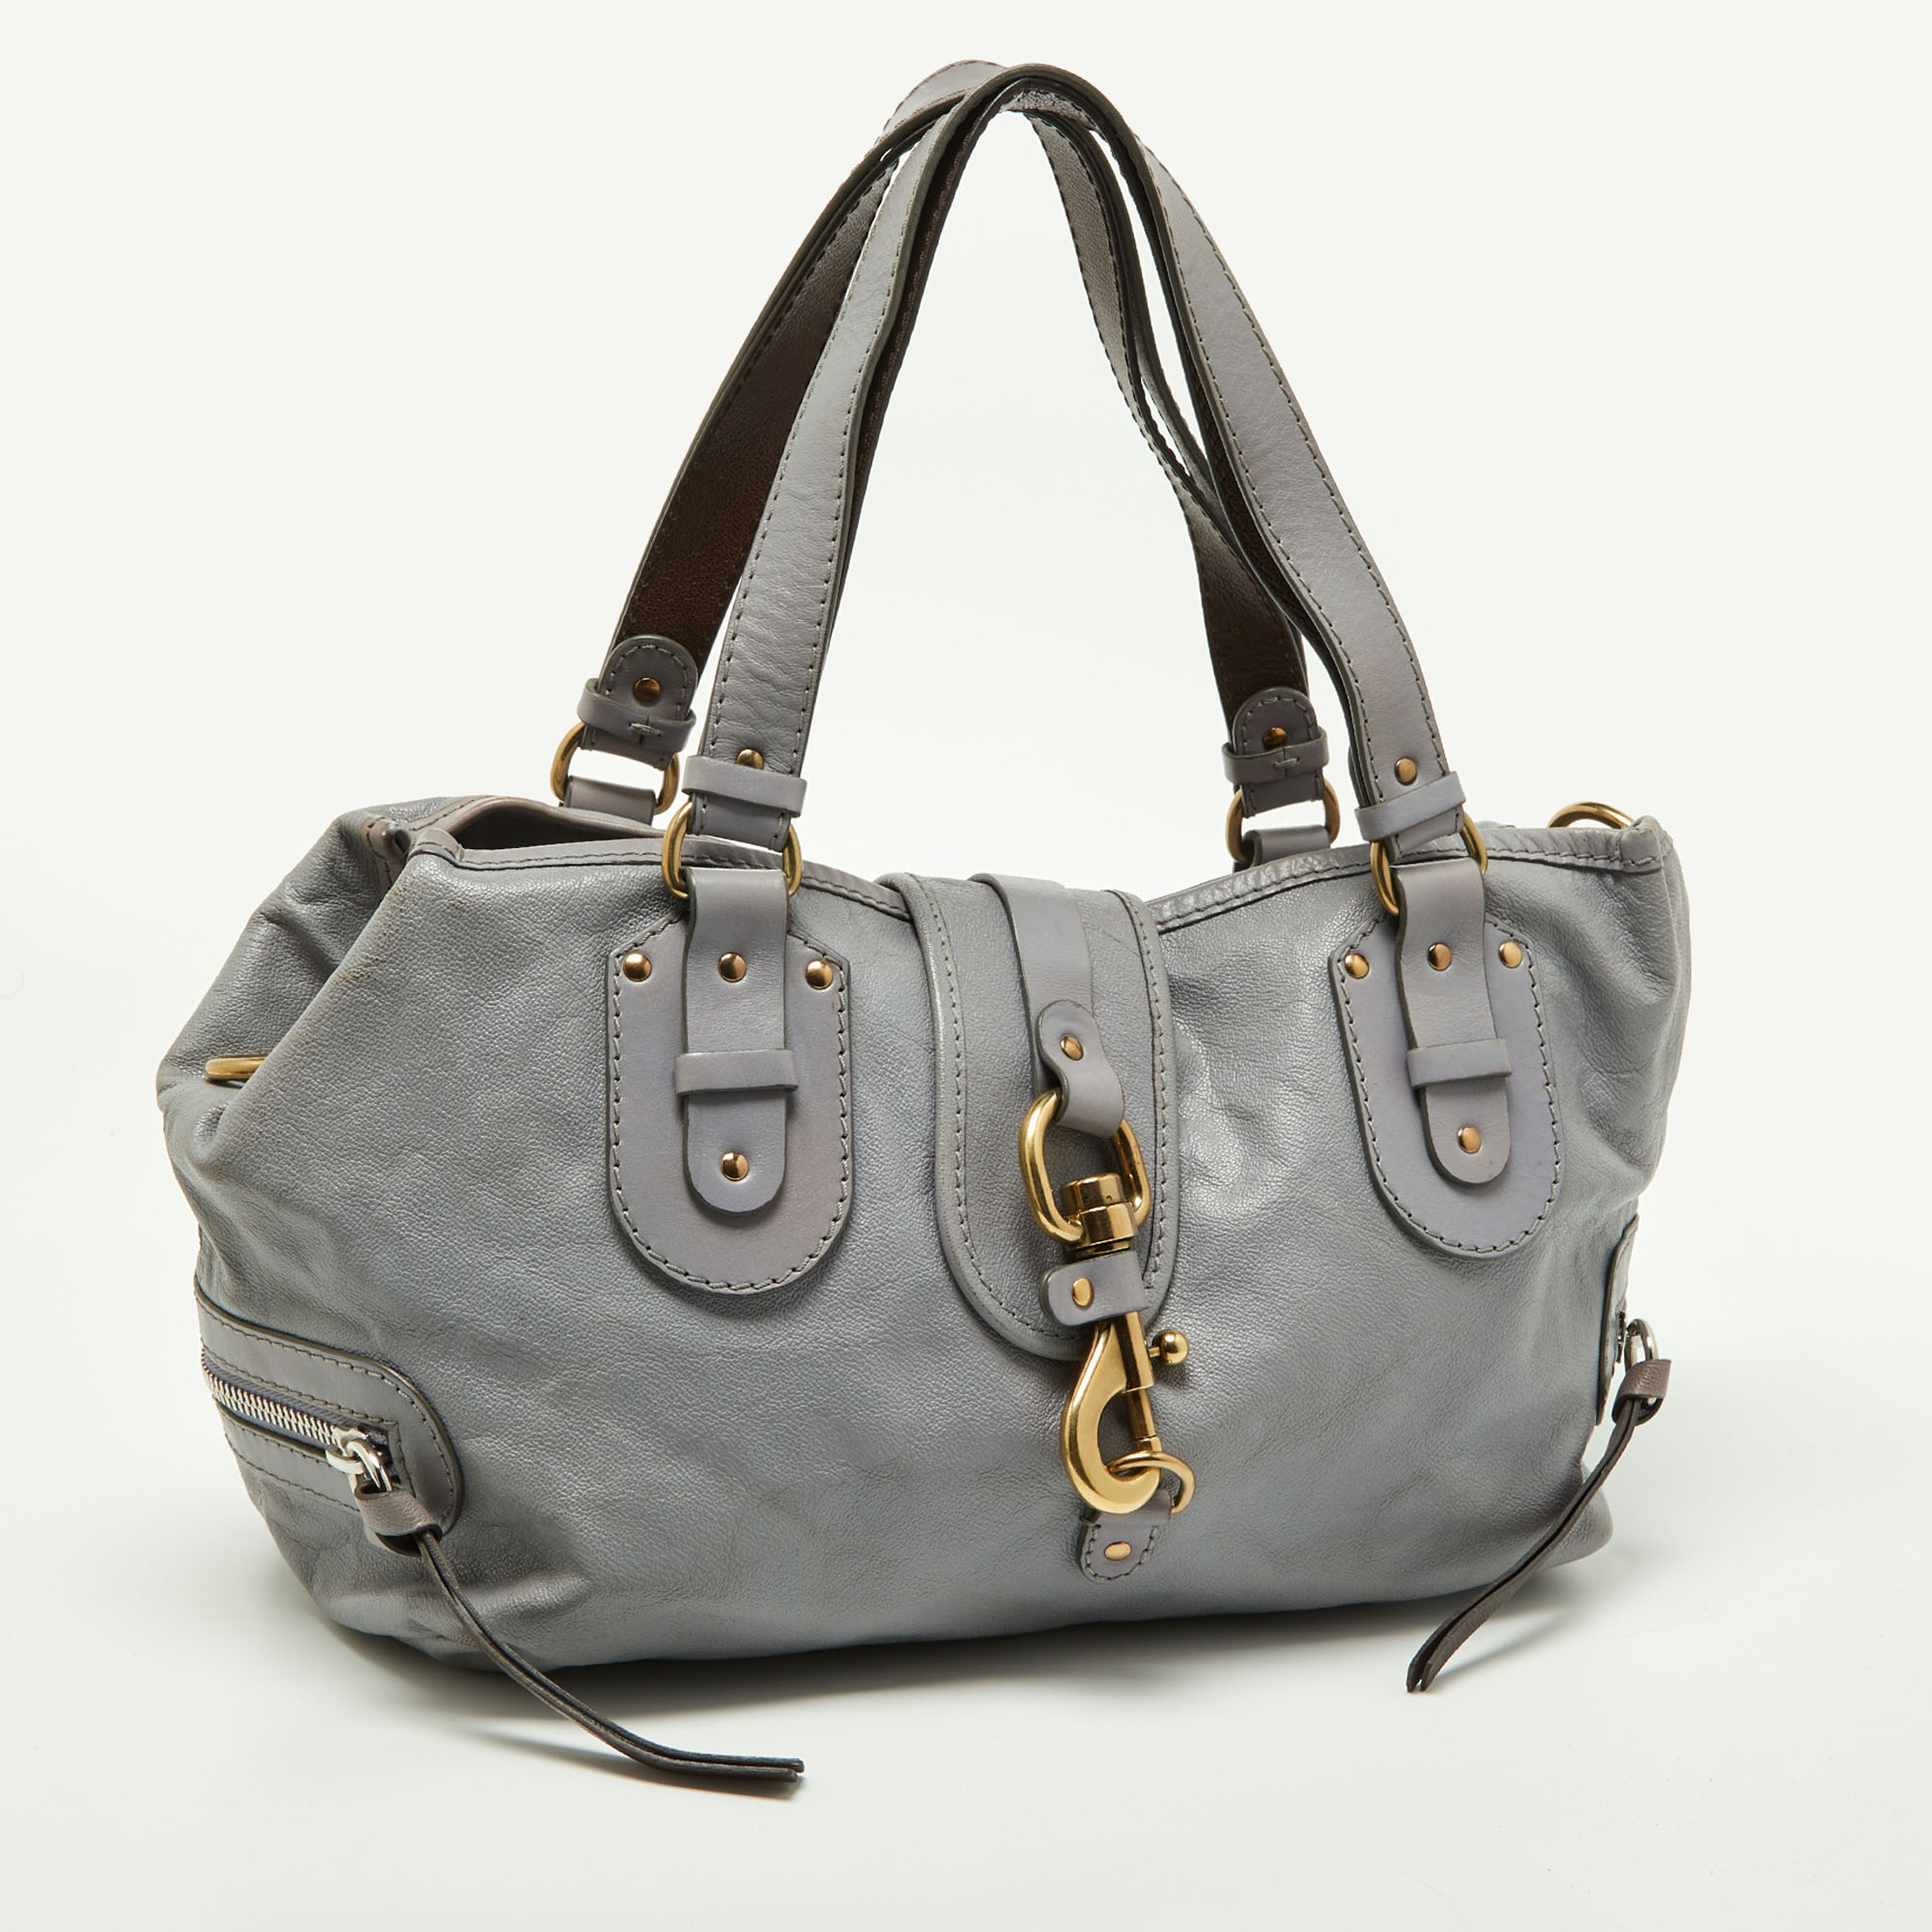 Chloe Lavender/Brown Leather Double Zip Tote